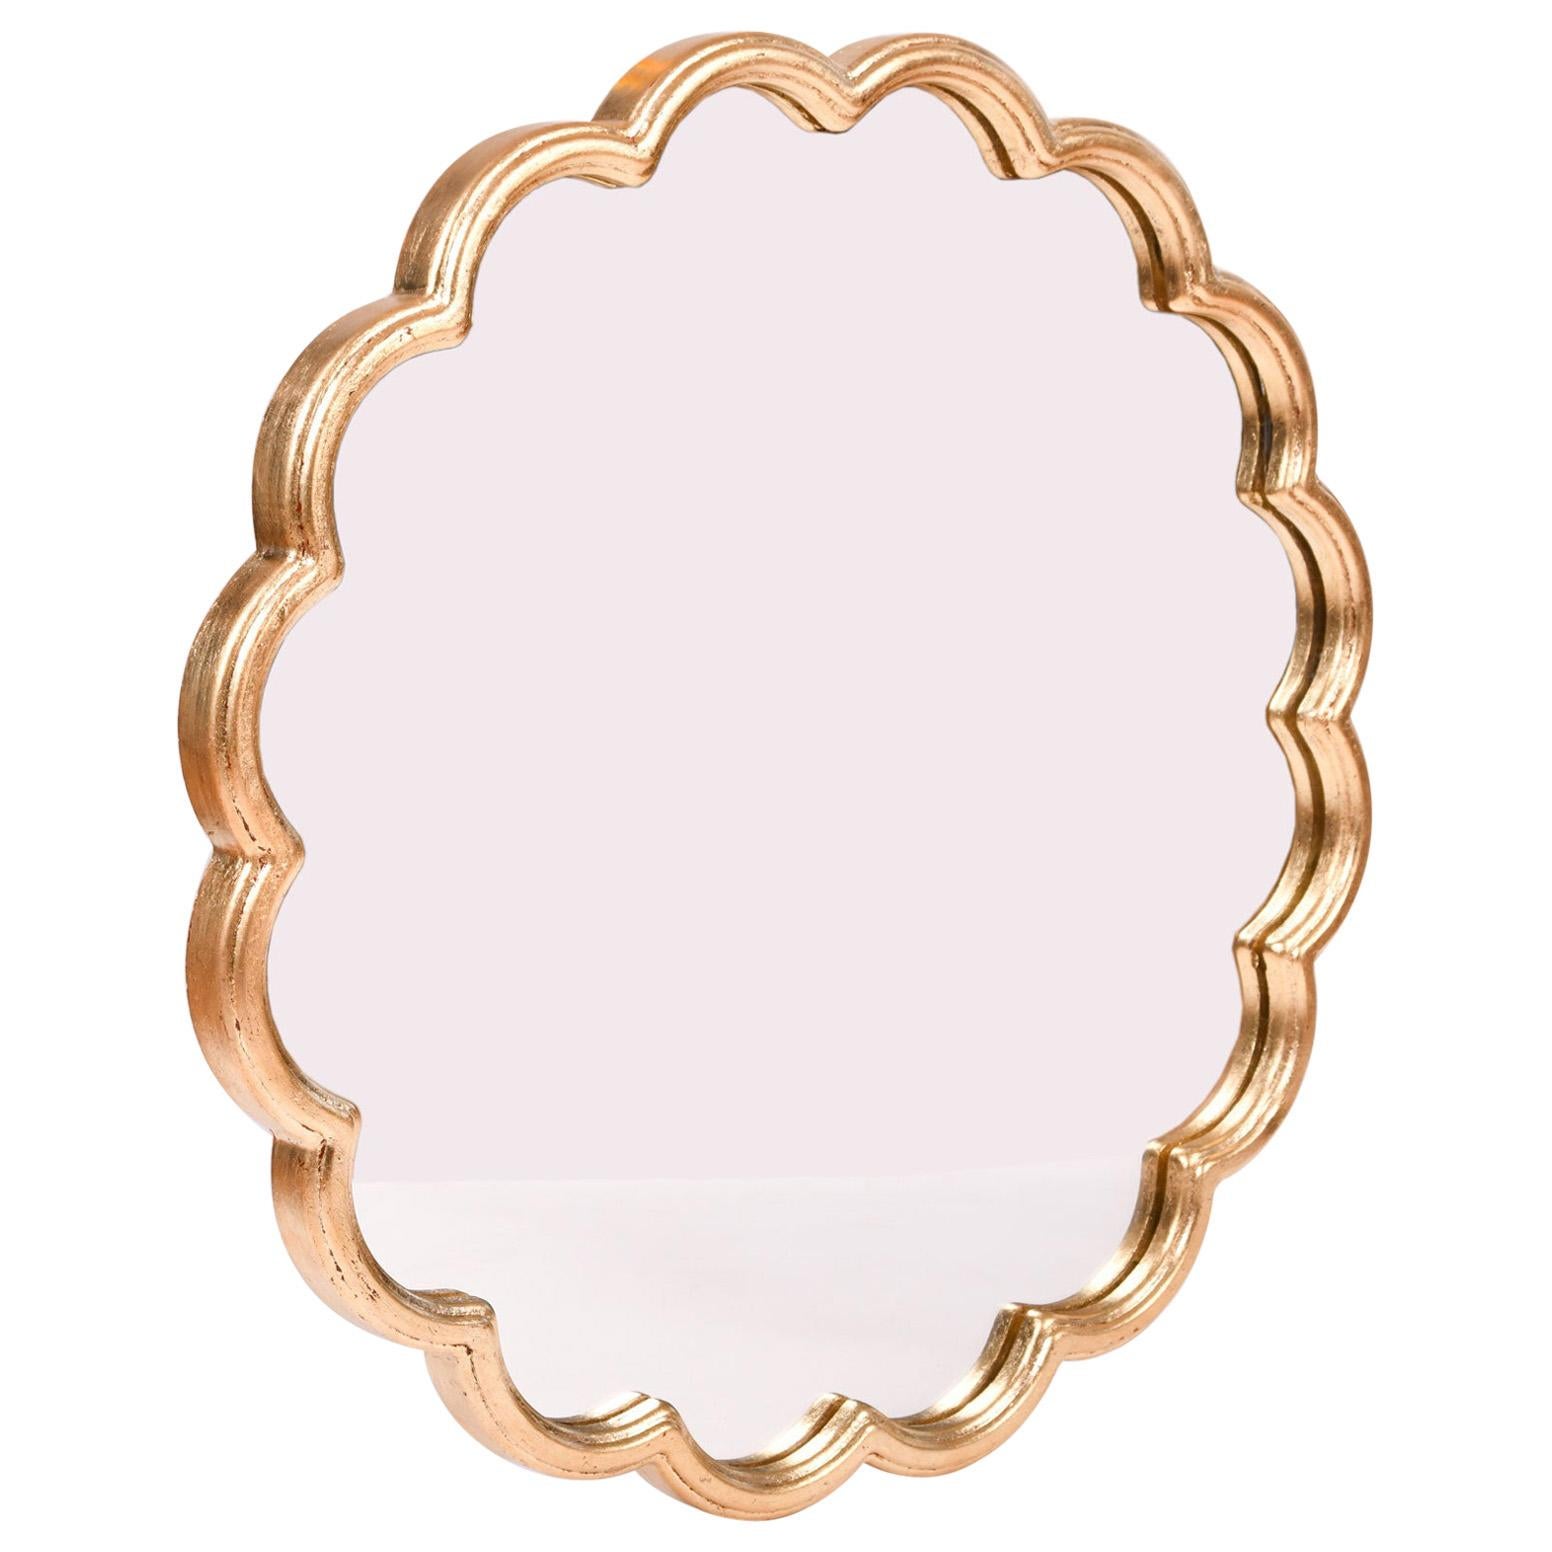 HAND GOLD LEAF SCALLOP ROUND FRAME VARIOUS SIZES BEVELED MIRROR AVAILABLE 